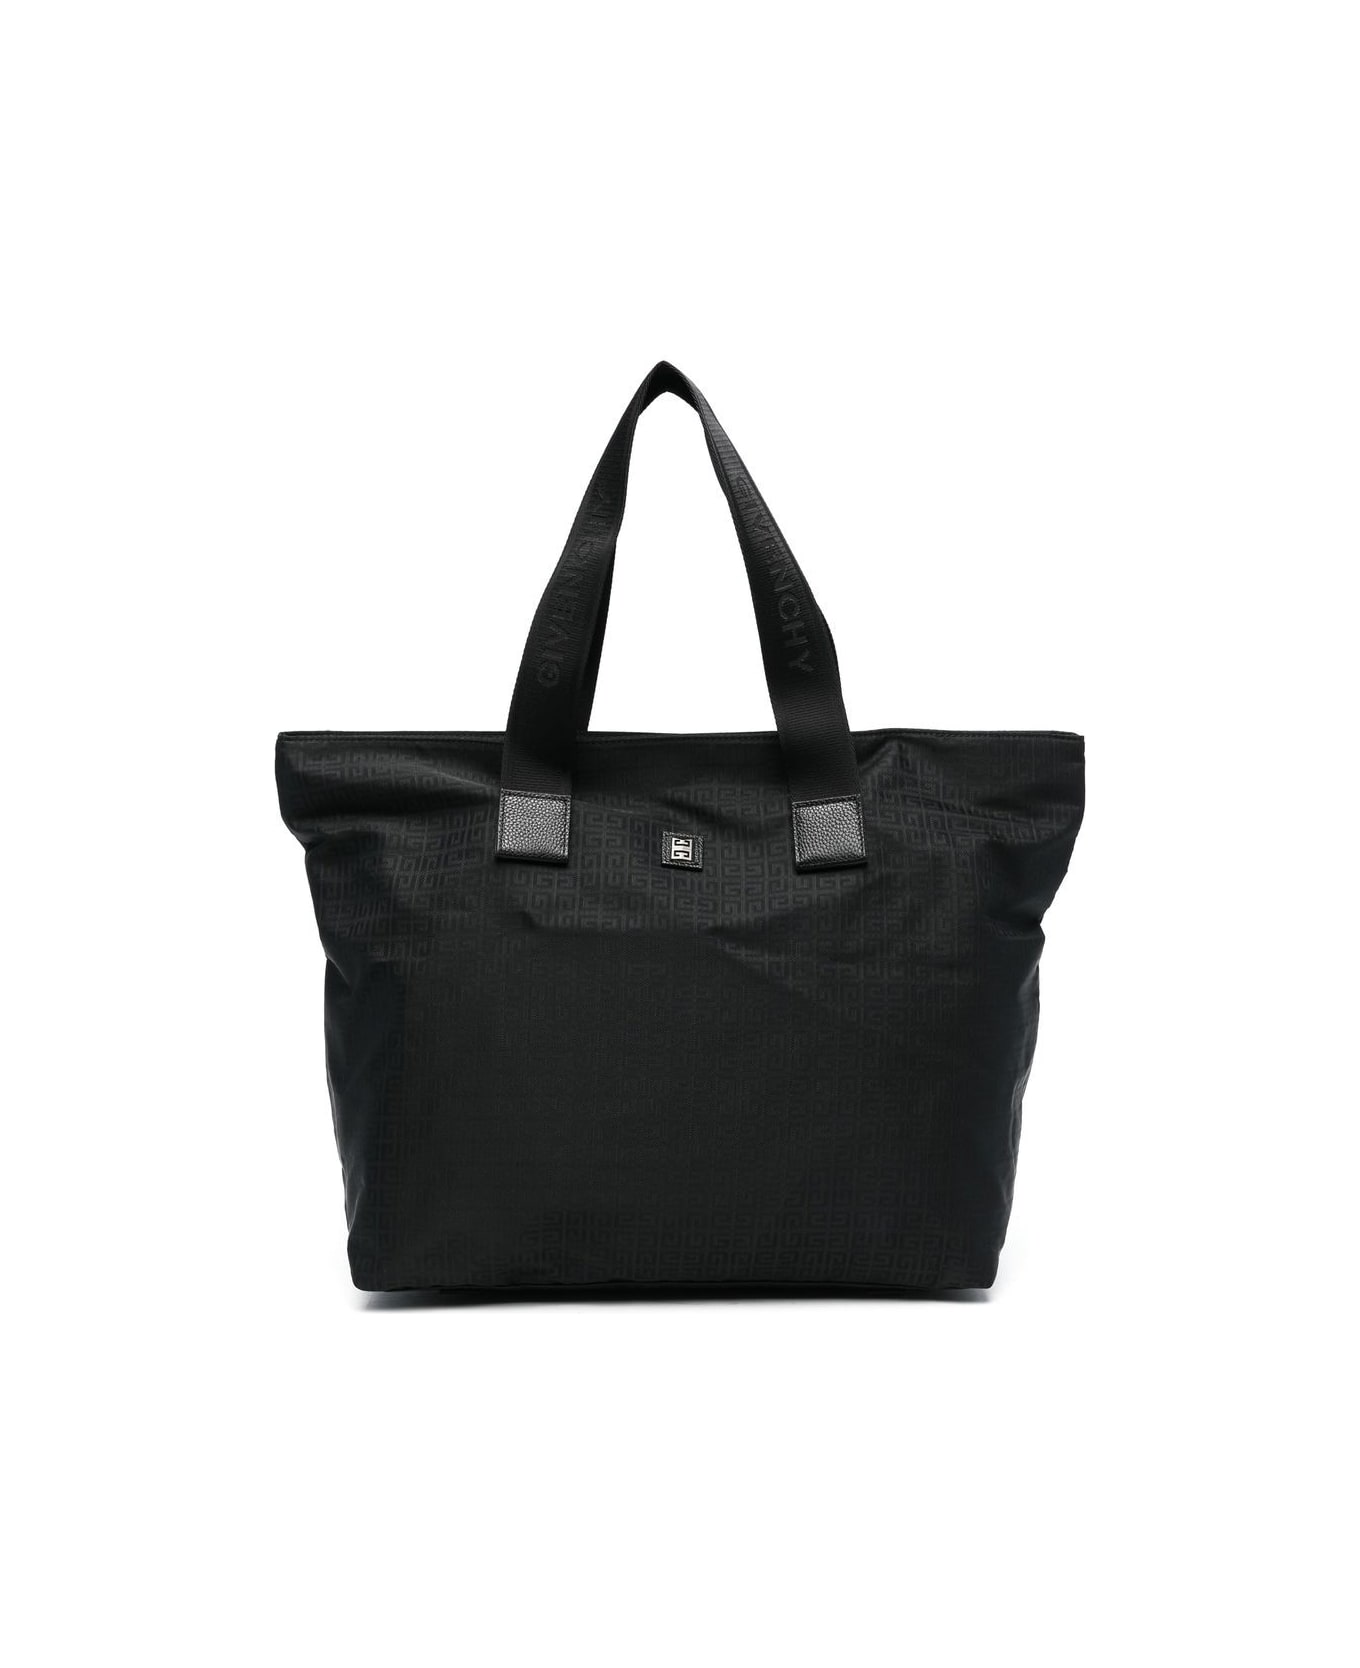 Givenchy Black Leather Changing Bag - Nero